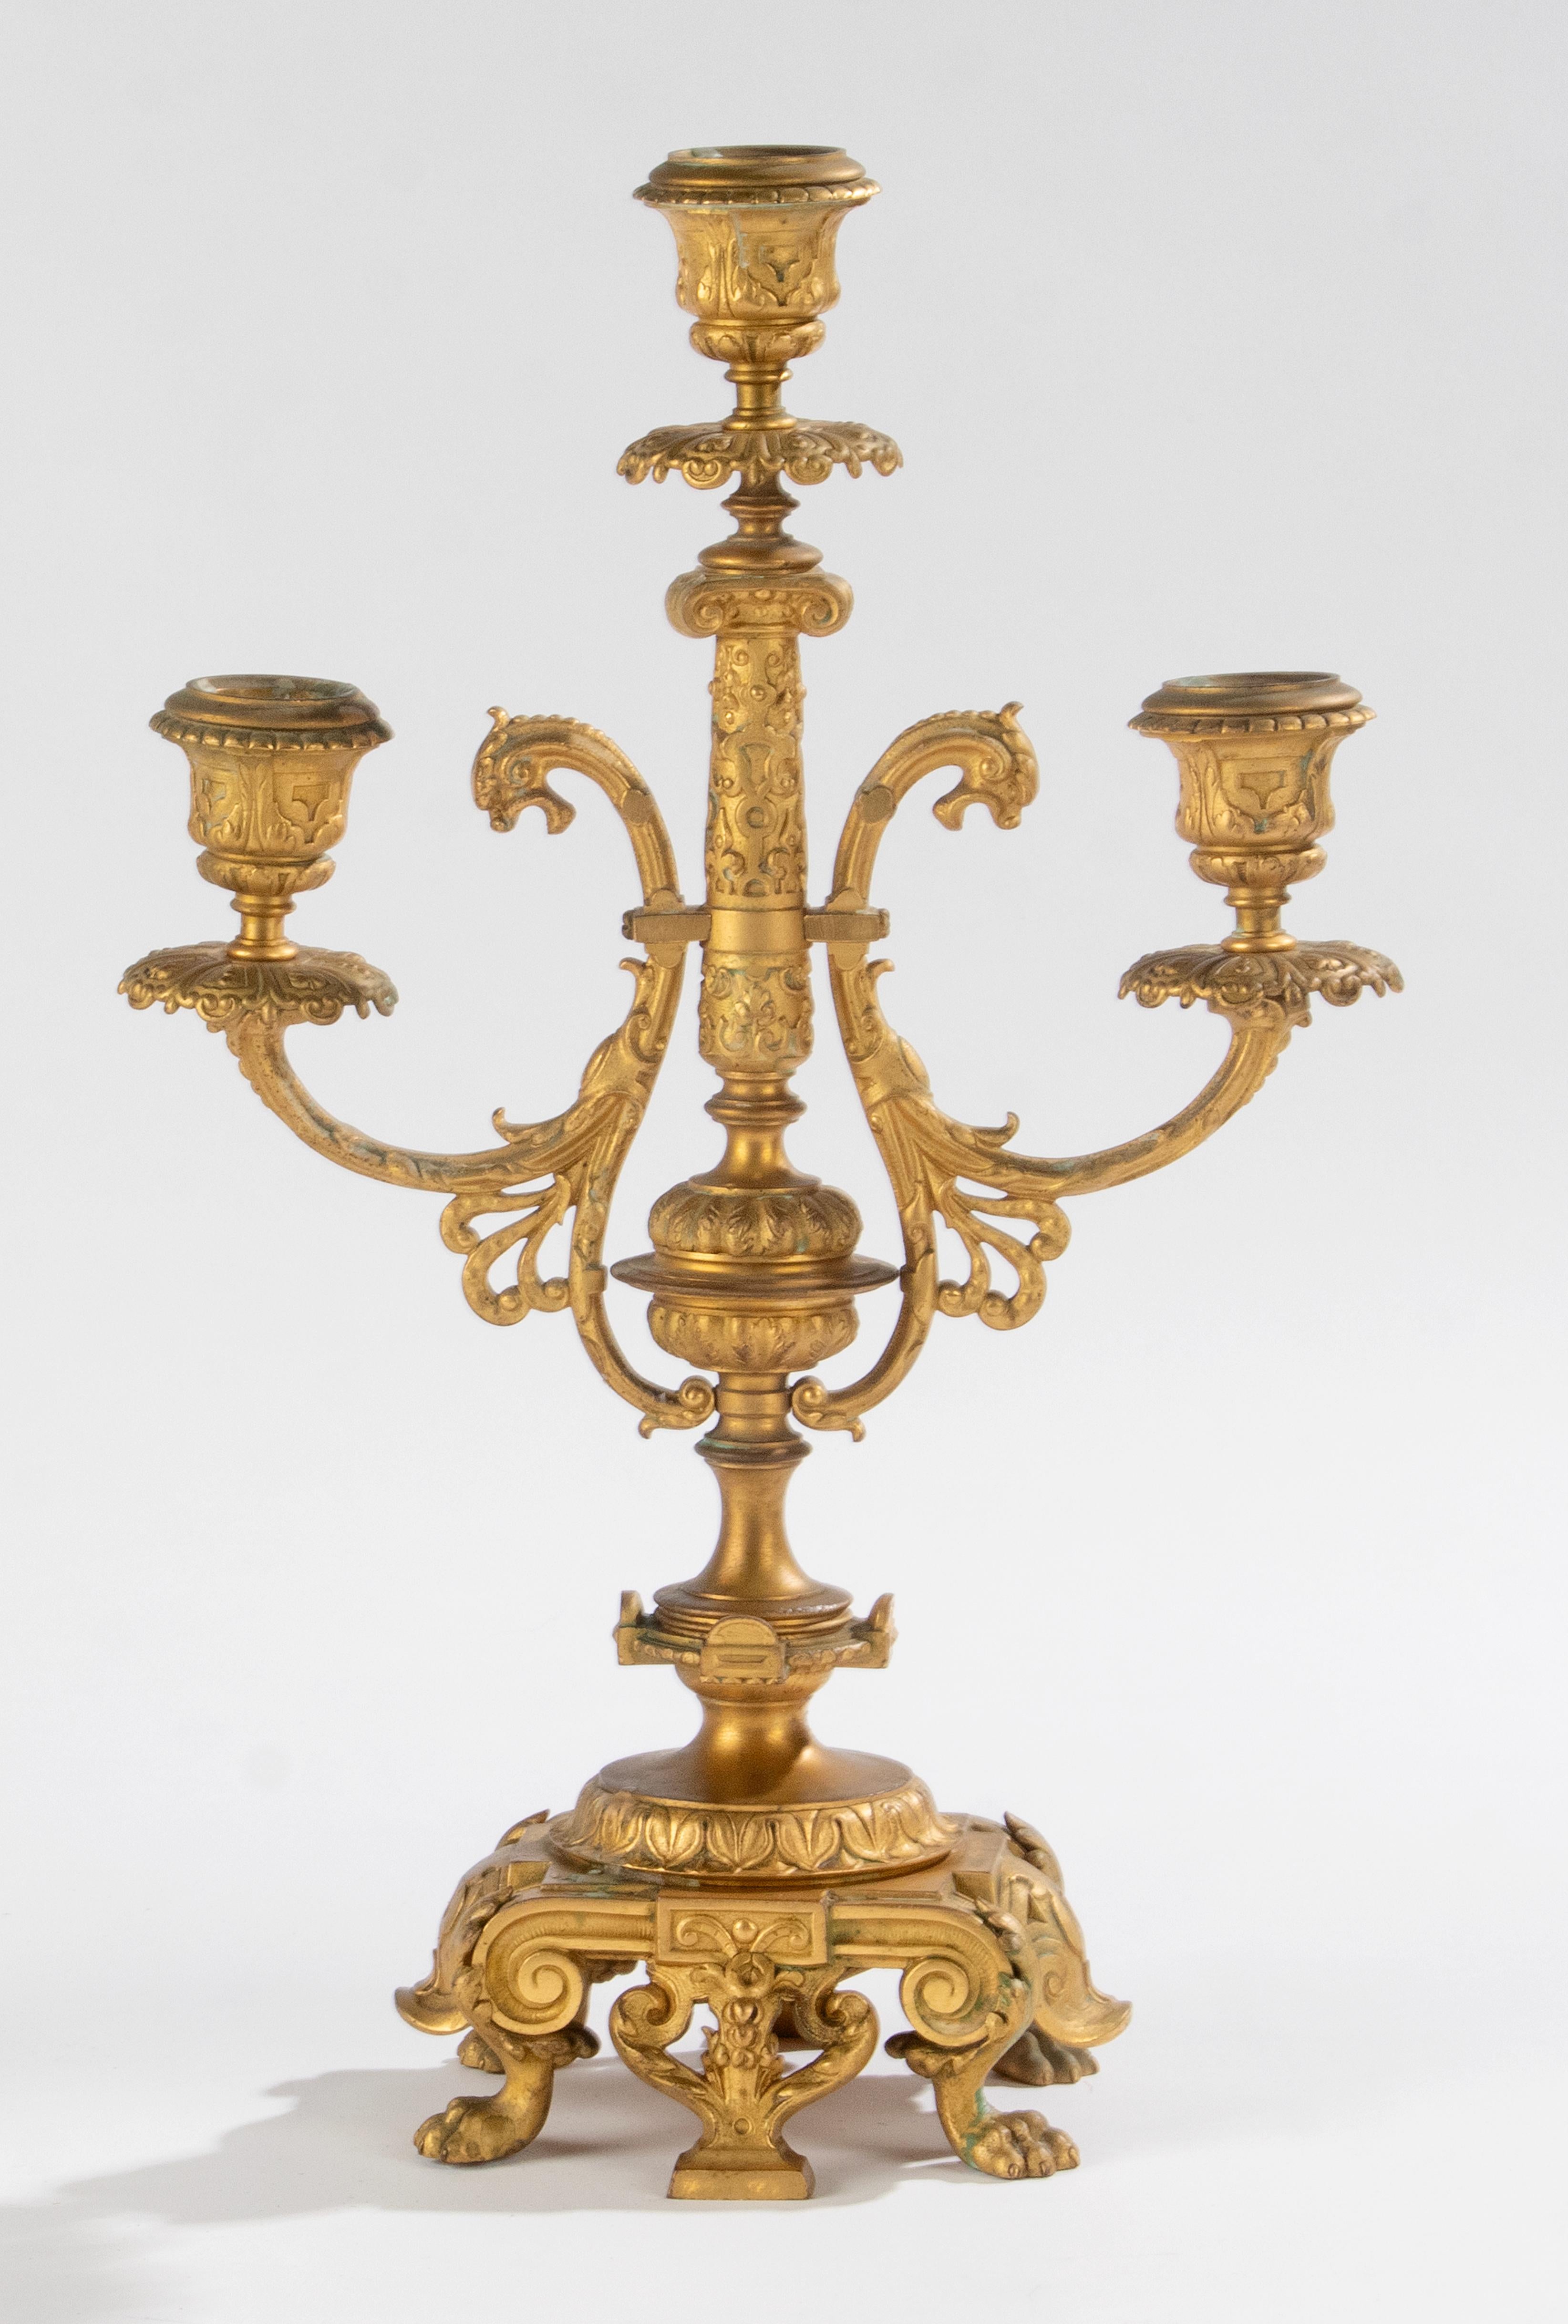 A fine pair of French candelabras, made of fire-gilt bronze, in Renaissance style. Each candlestick has three candleholders. This pair of candelabra's are original for a fire mantel. Not very deep, and the candle holders are different in height, for